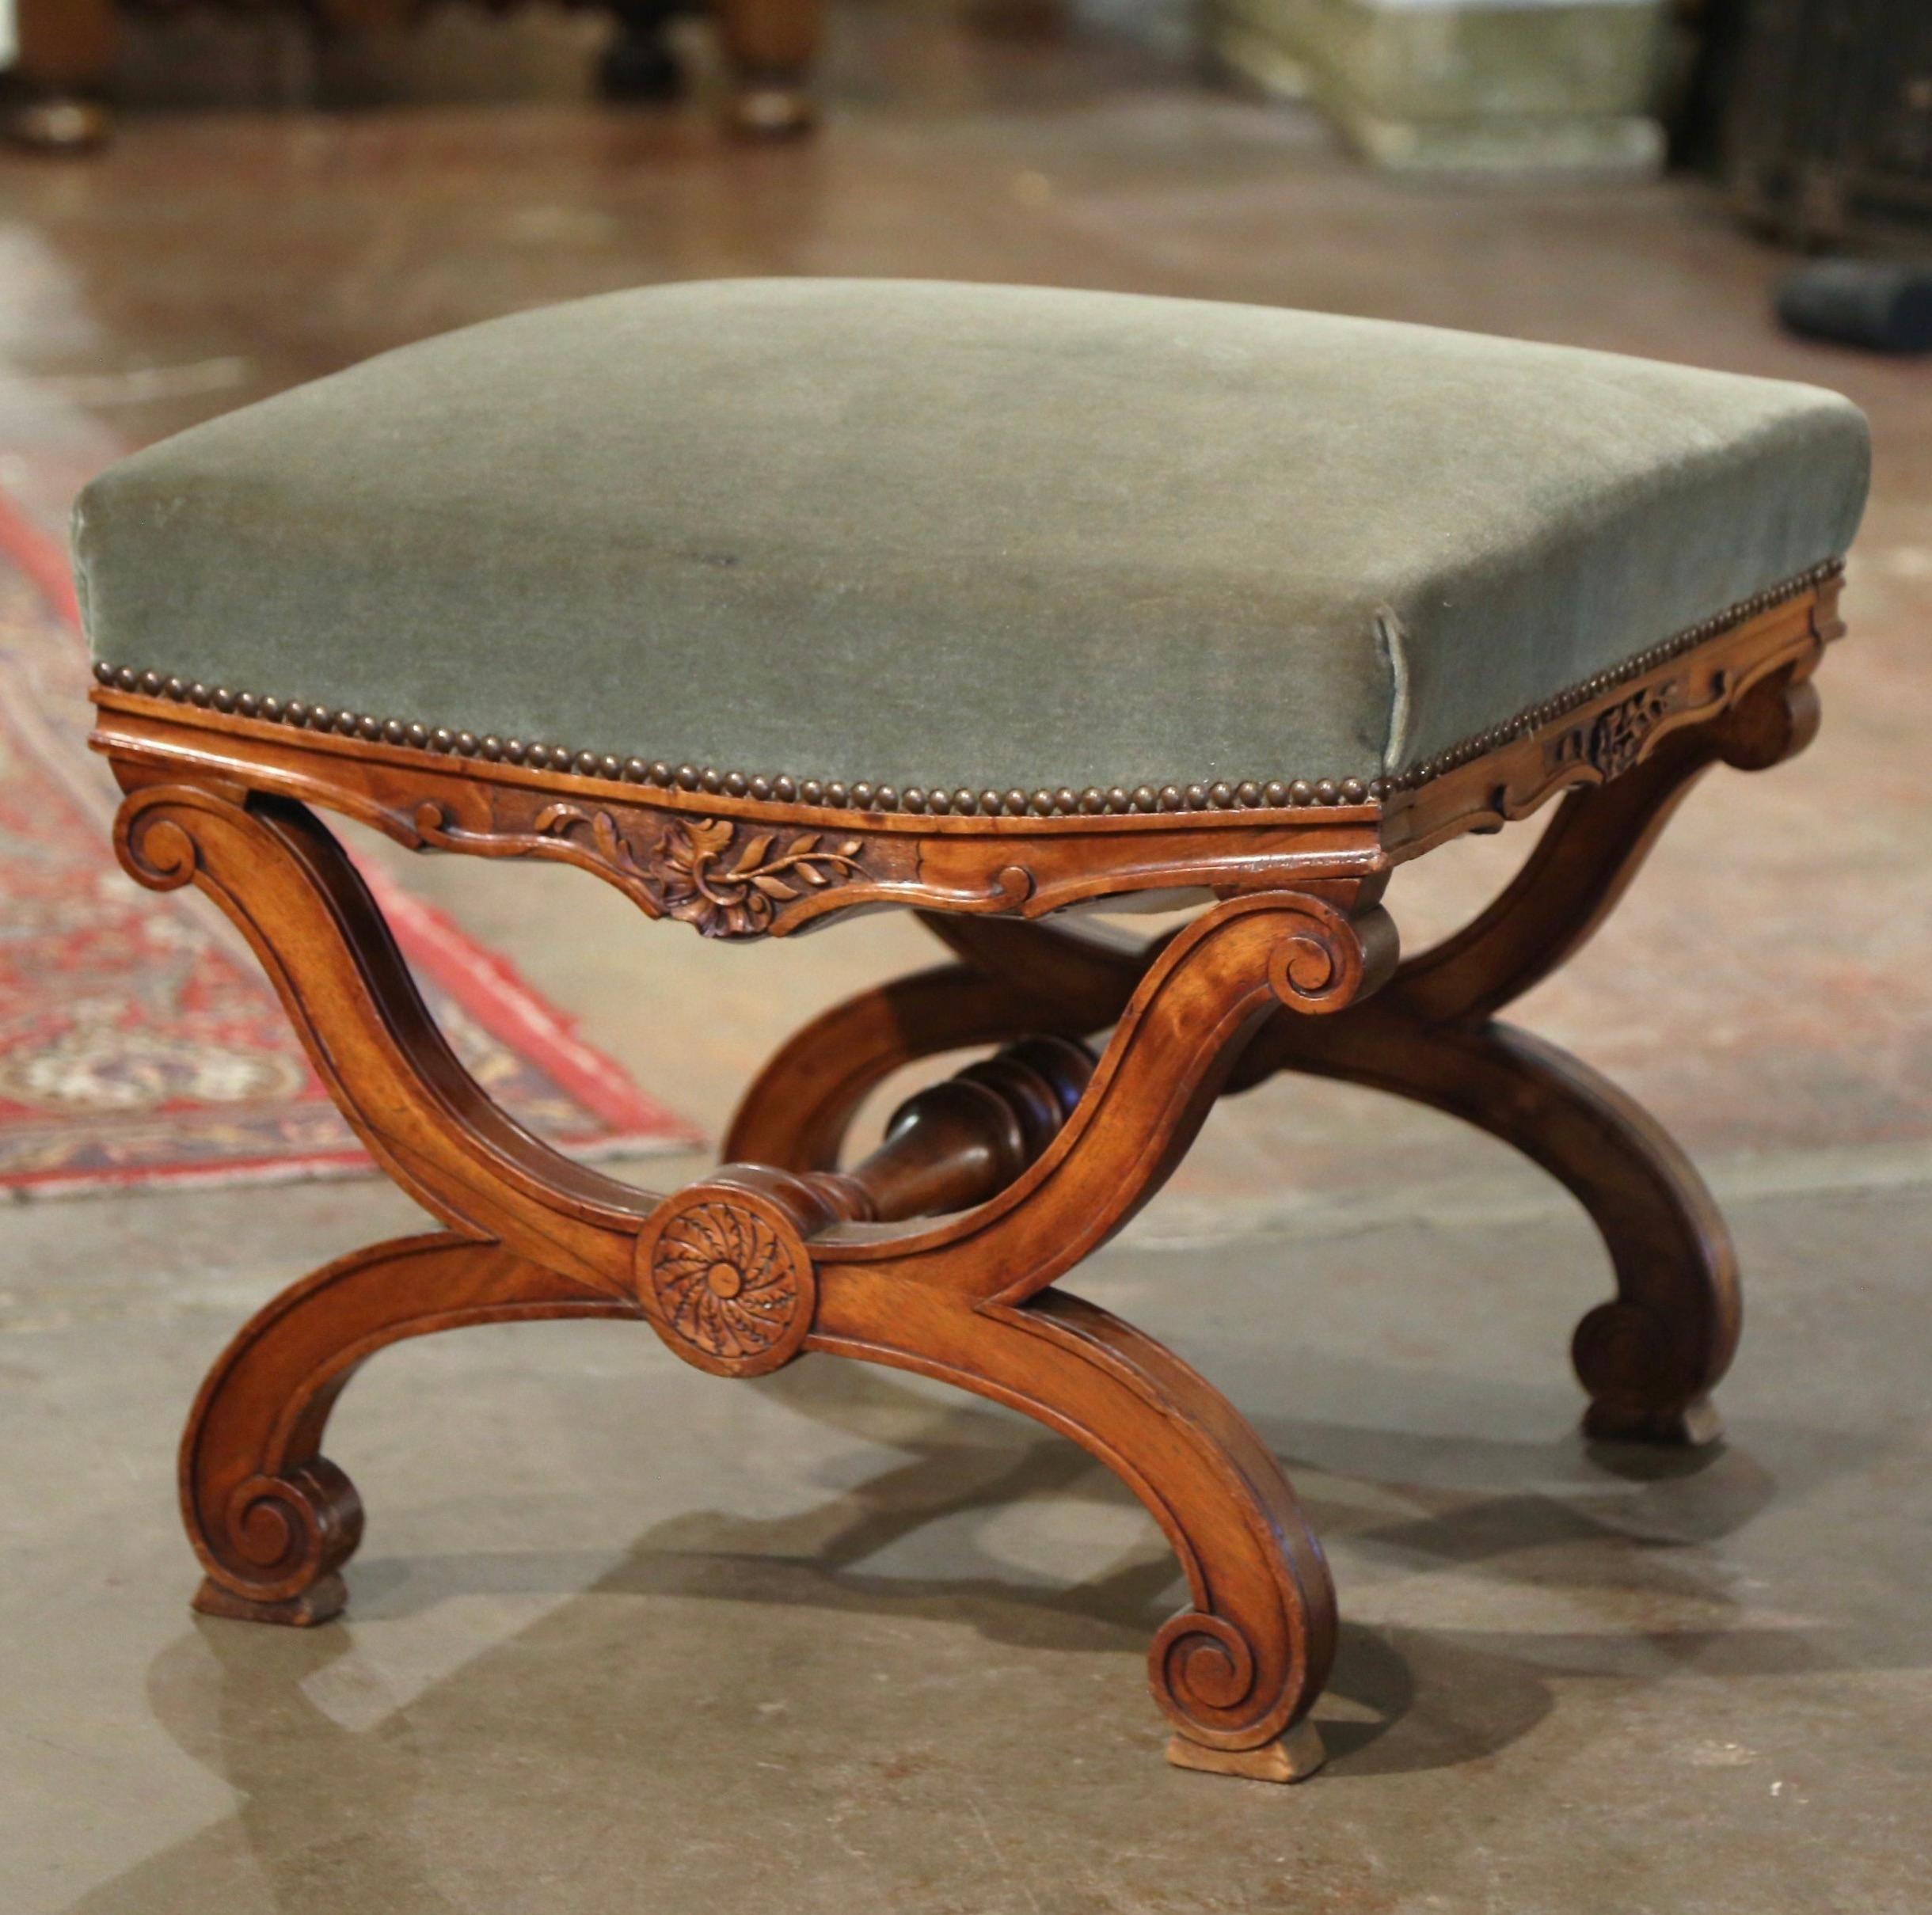 Embellish your formal living room with this elegant antique curule stool. Crafted in France circa 1860, the stool known as 